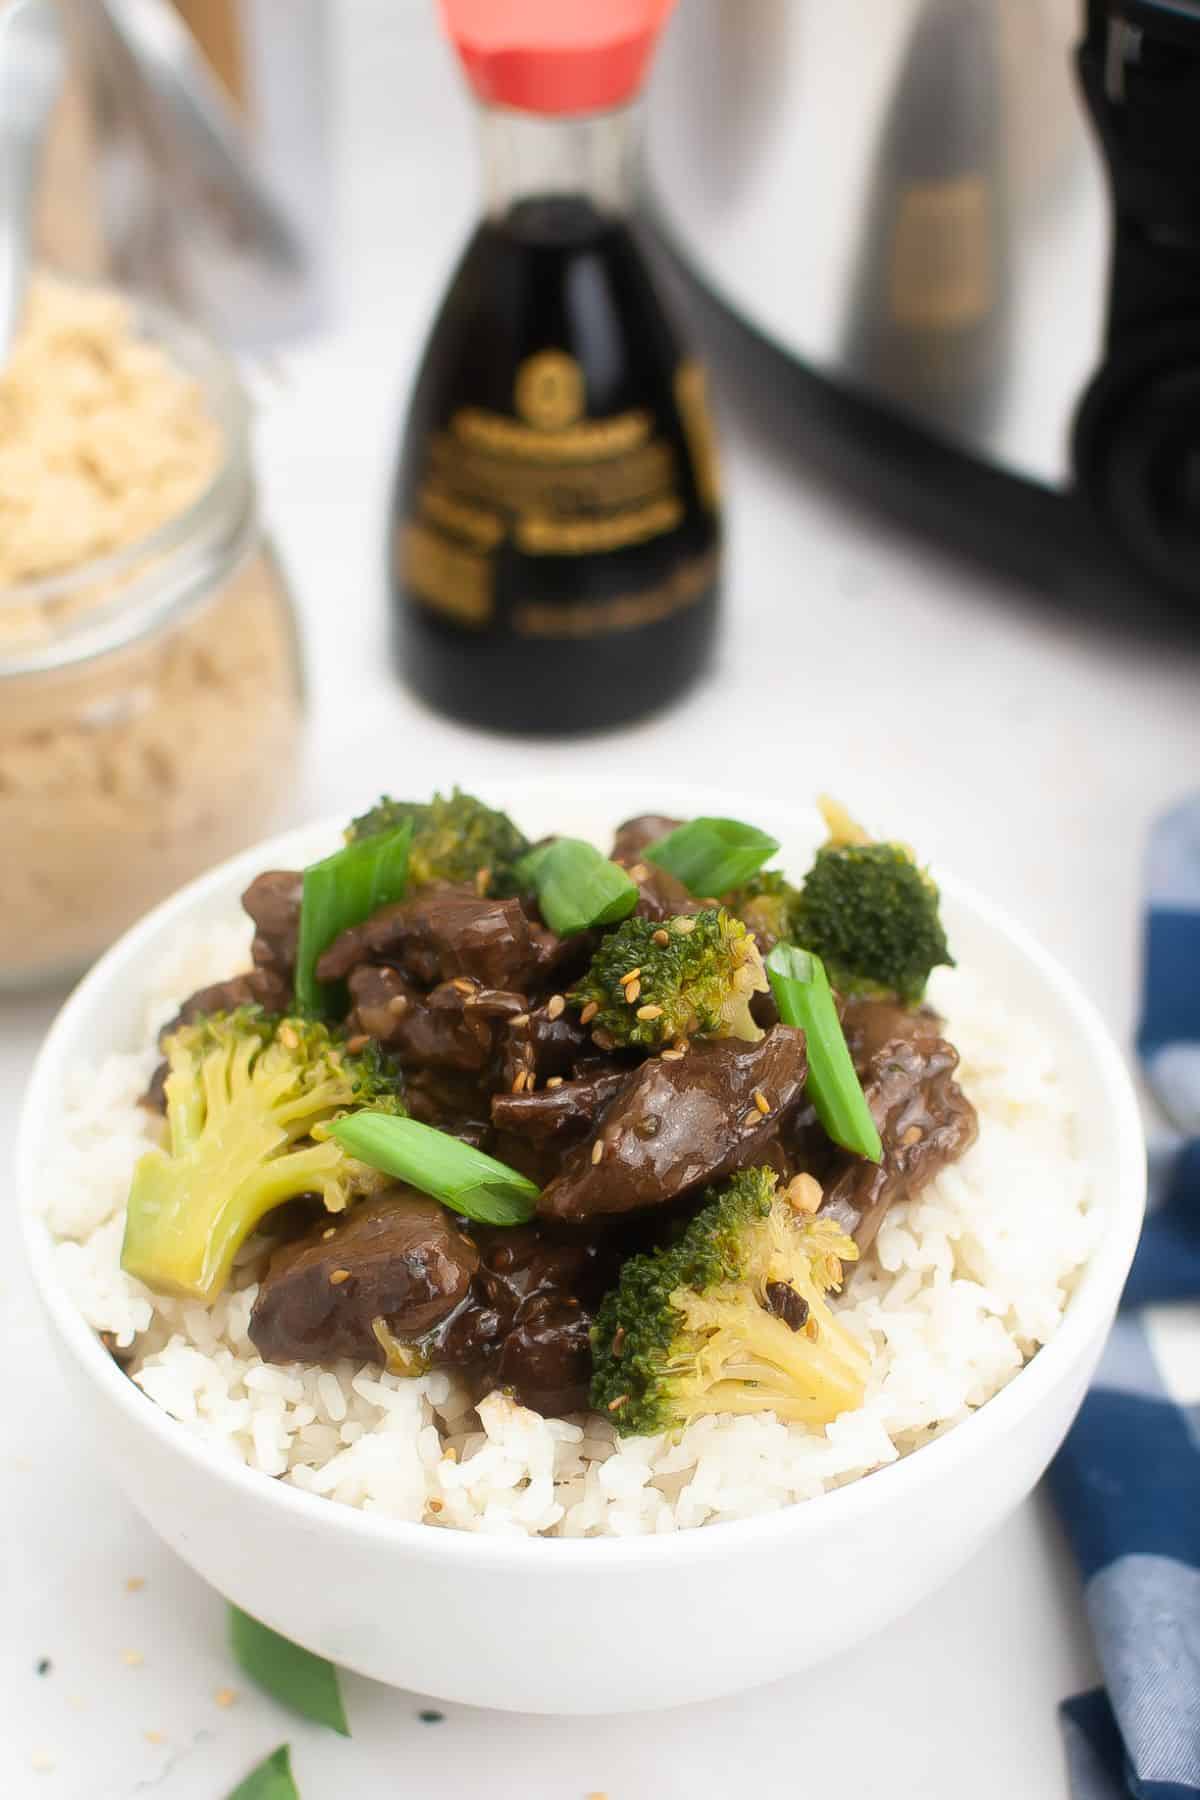 teriyaki beef served on top of a bed of white rice.